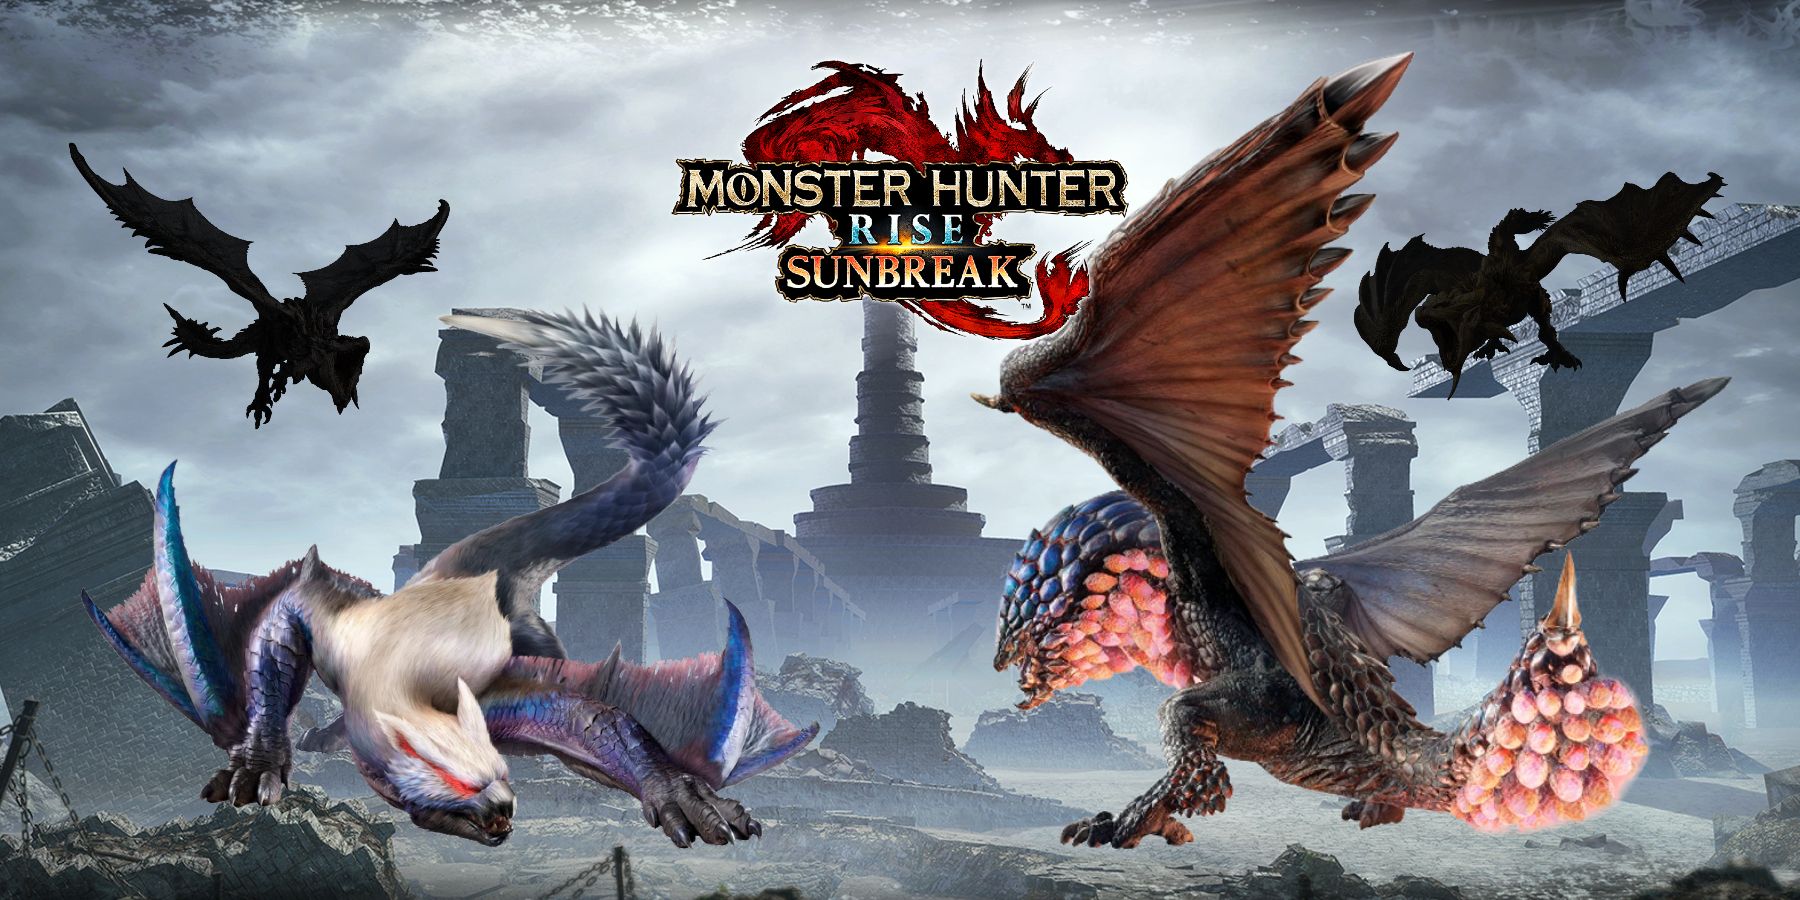 Monster Hunter Rise: Sunbreak Fourth Title Update To Release On